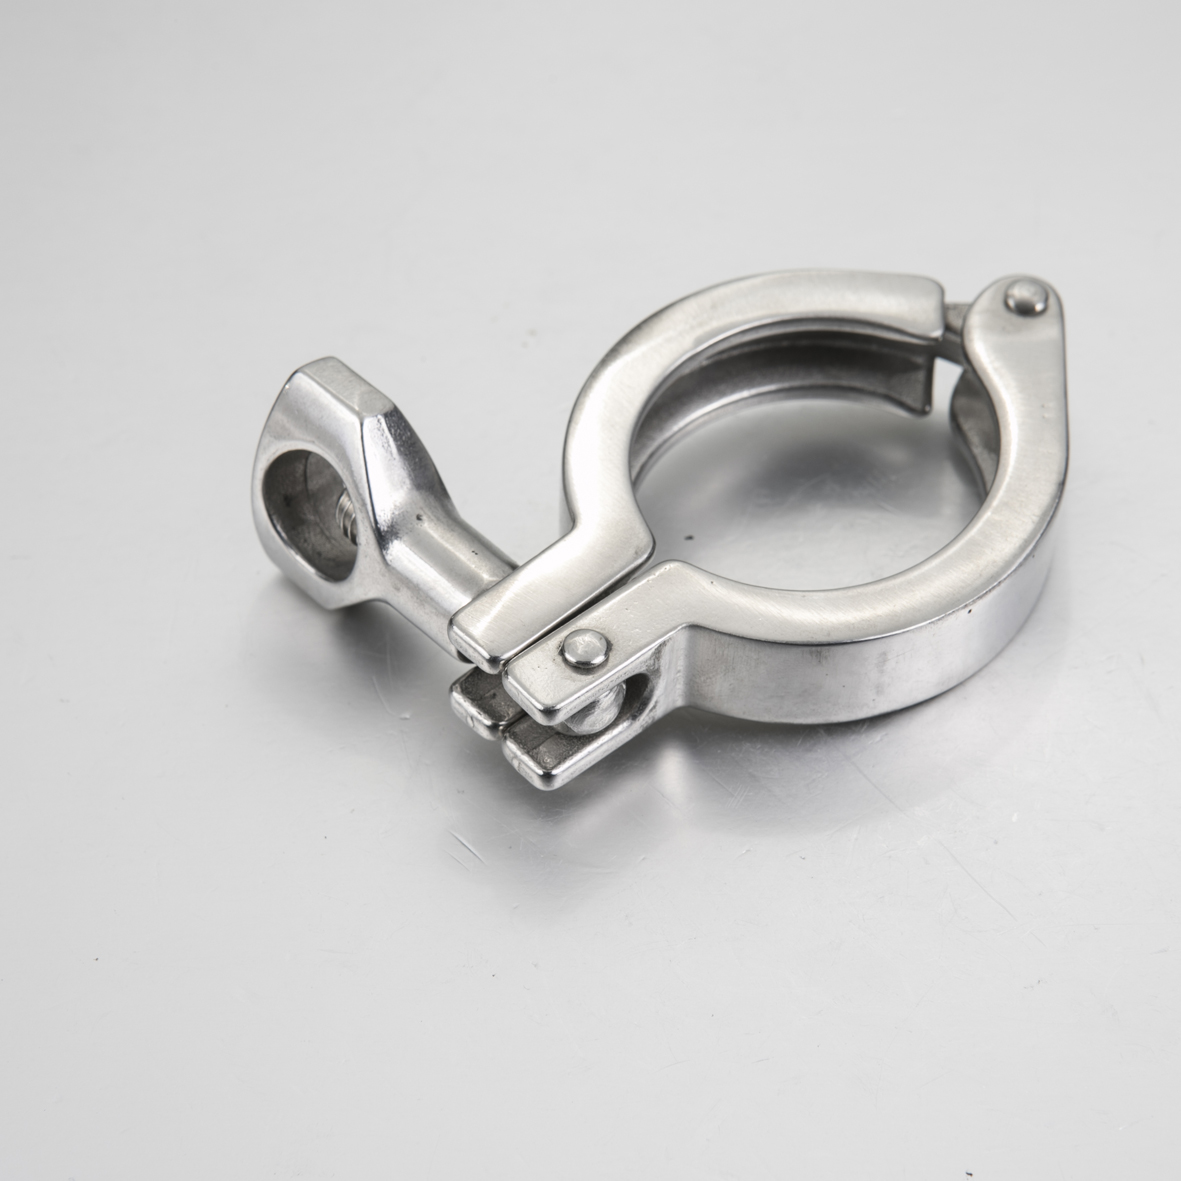 Stainless Steel Sanitary Clamp Set